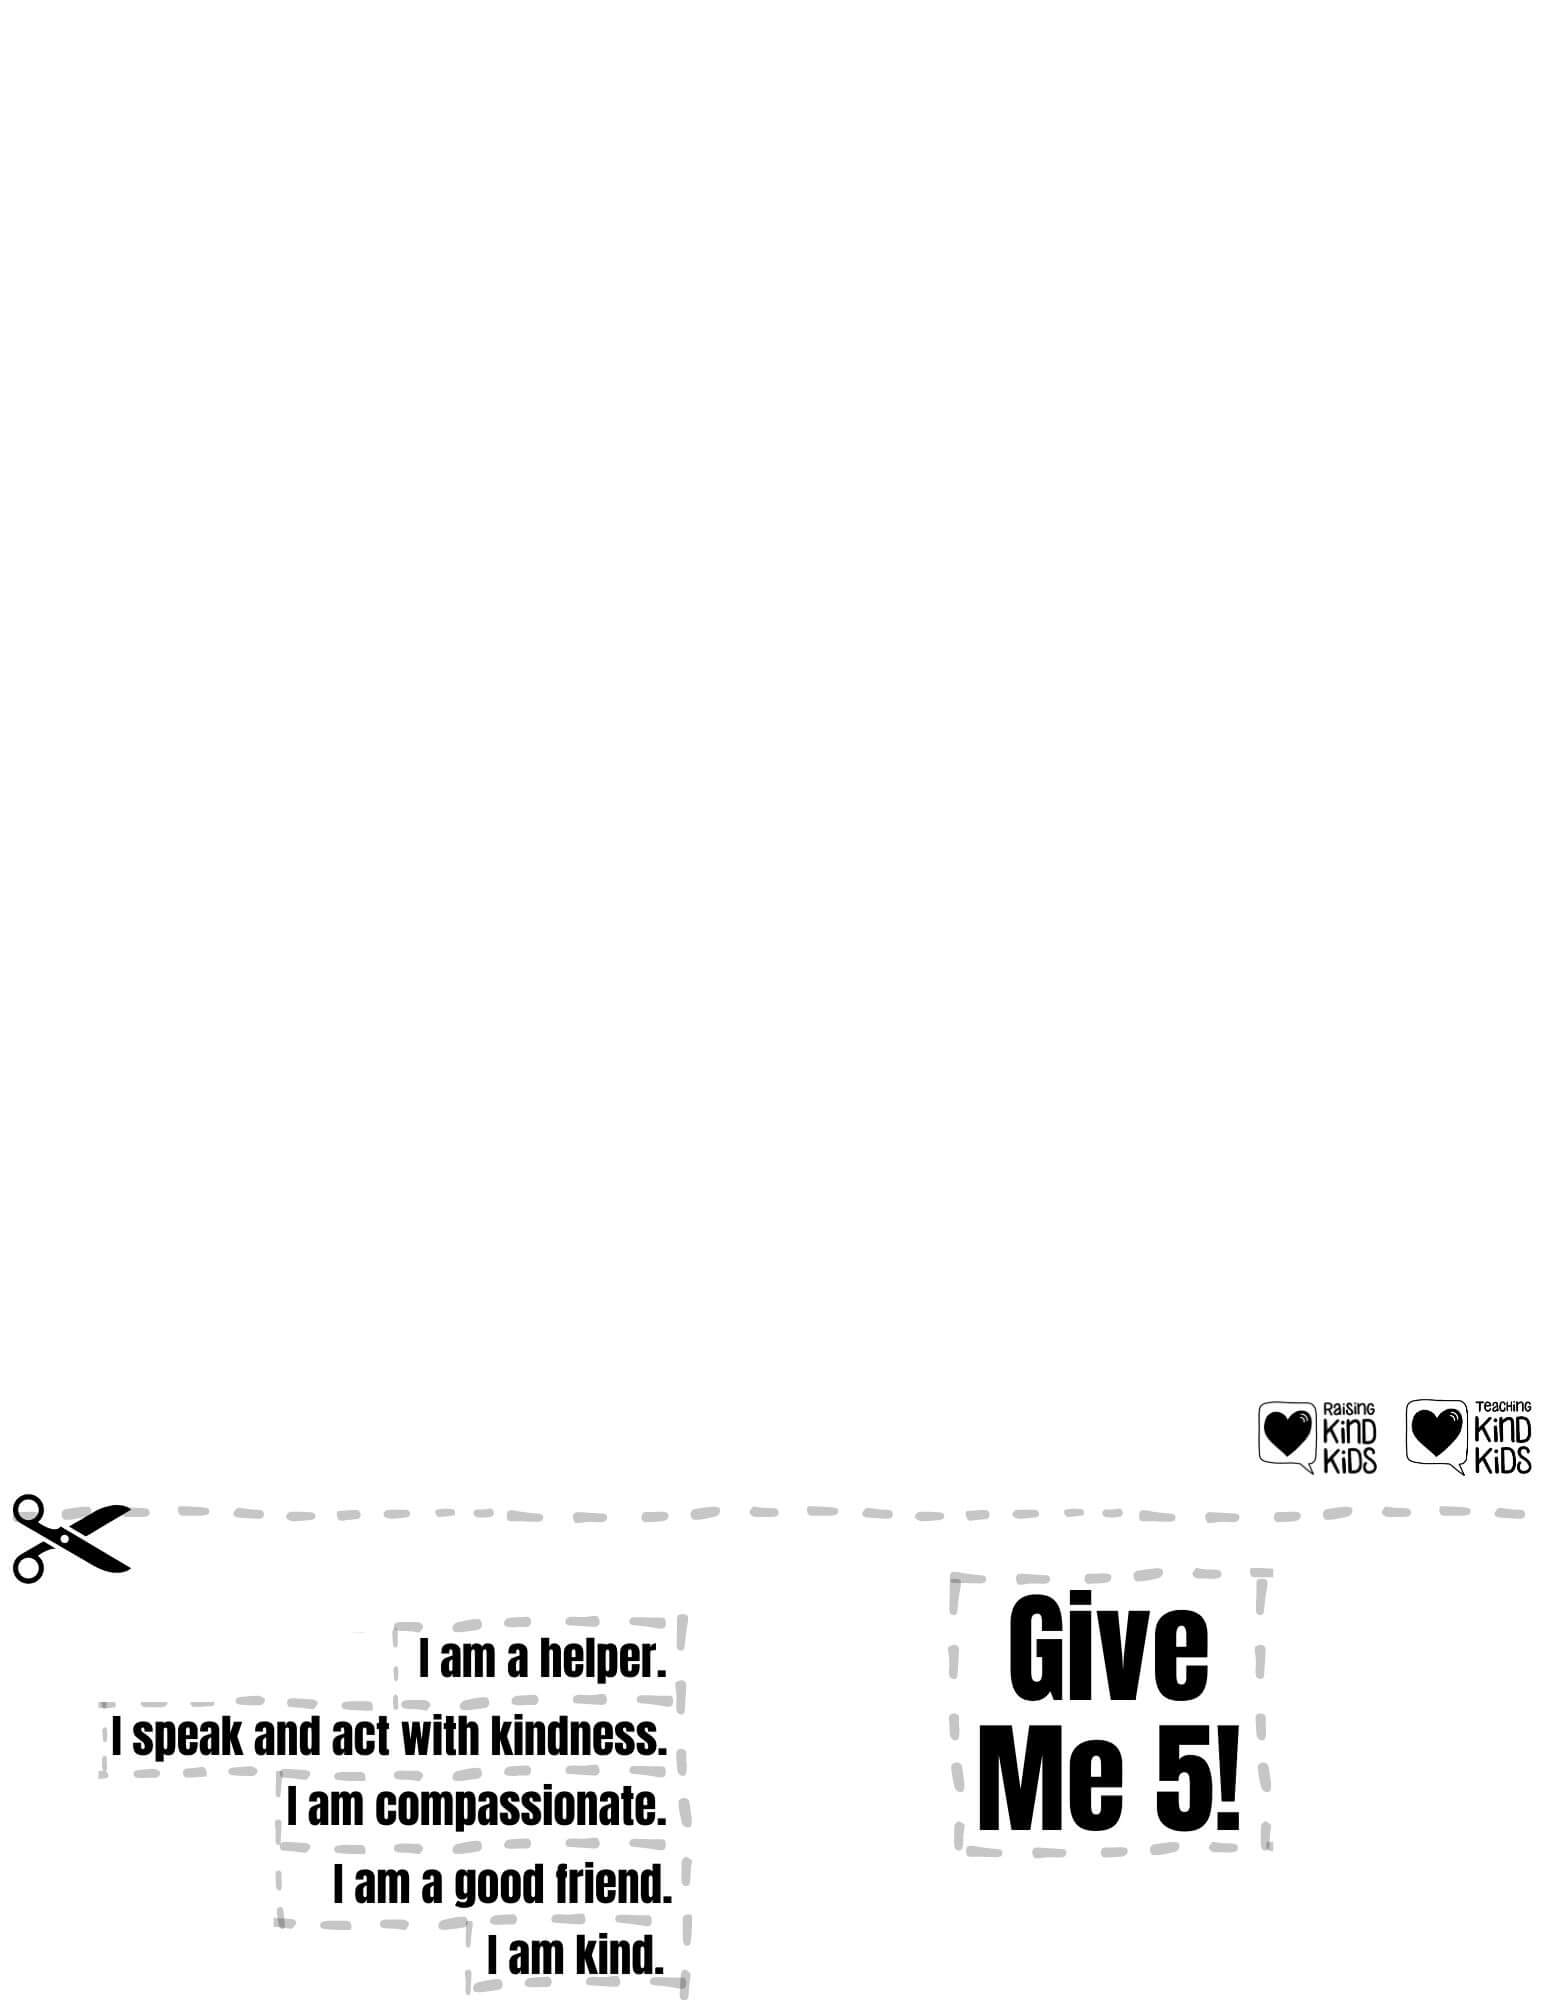 This Give Me 5! Kindness activity for kids is a great way for students to internalize what they need to do to be a kind person. It includes positive affirmations for kids to set clear expectations of what they need to do to show more compassion. It's a great for sel curriculum and character education.